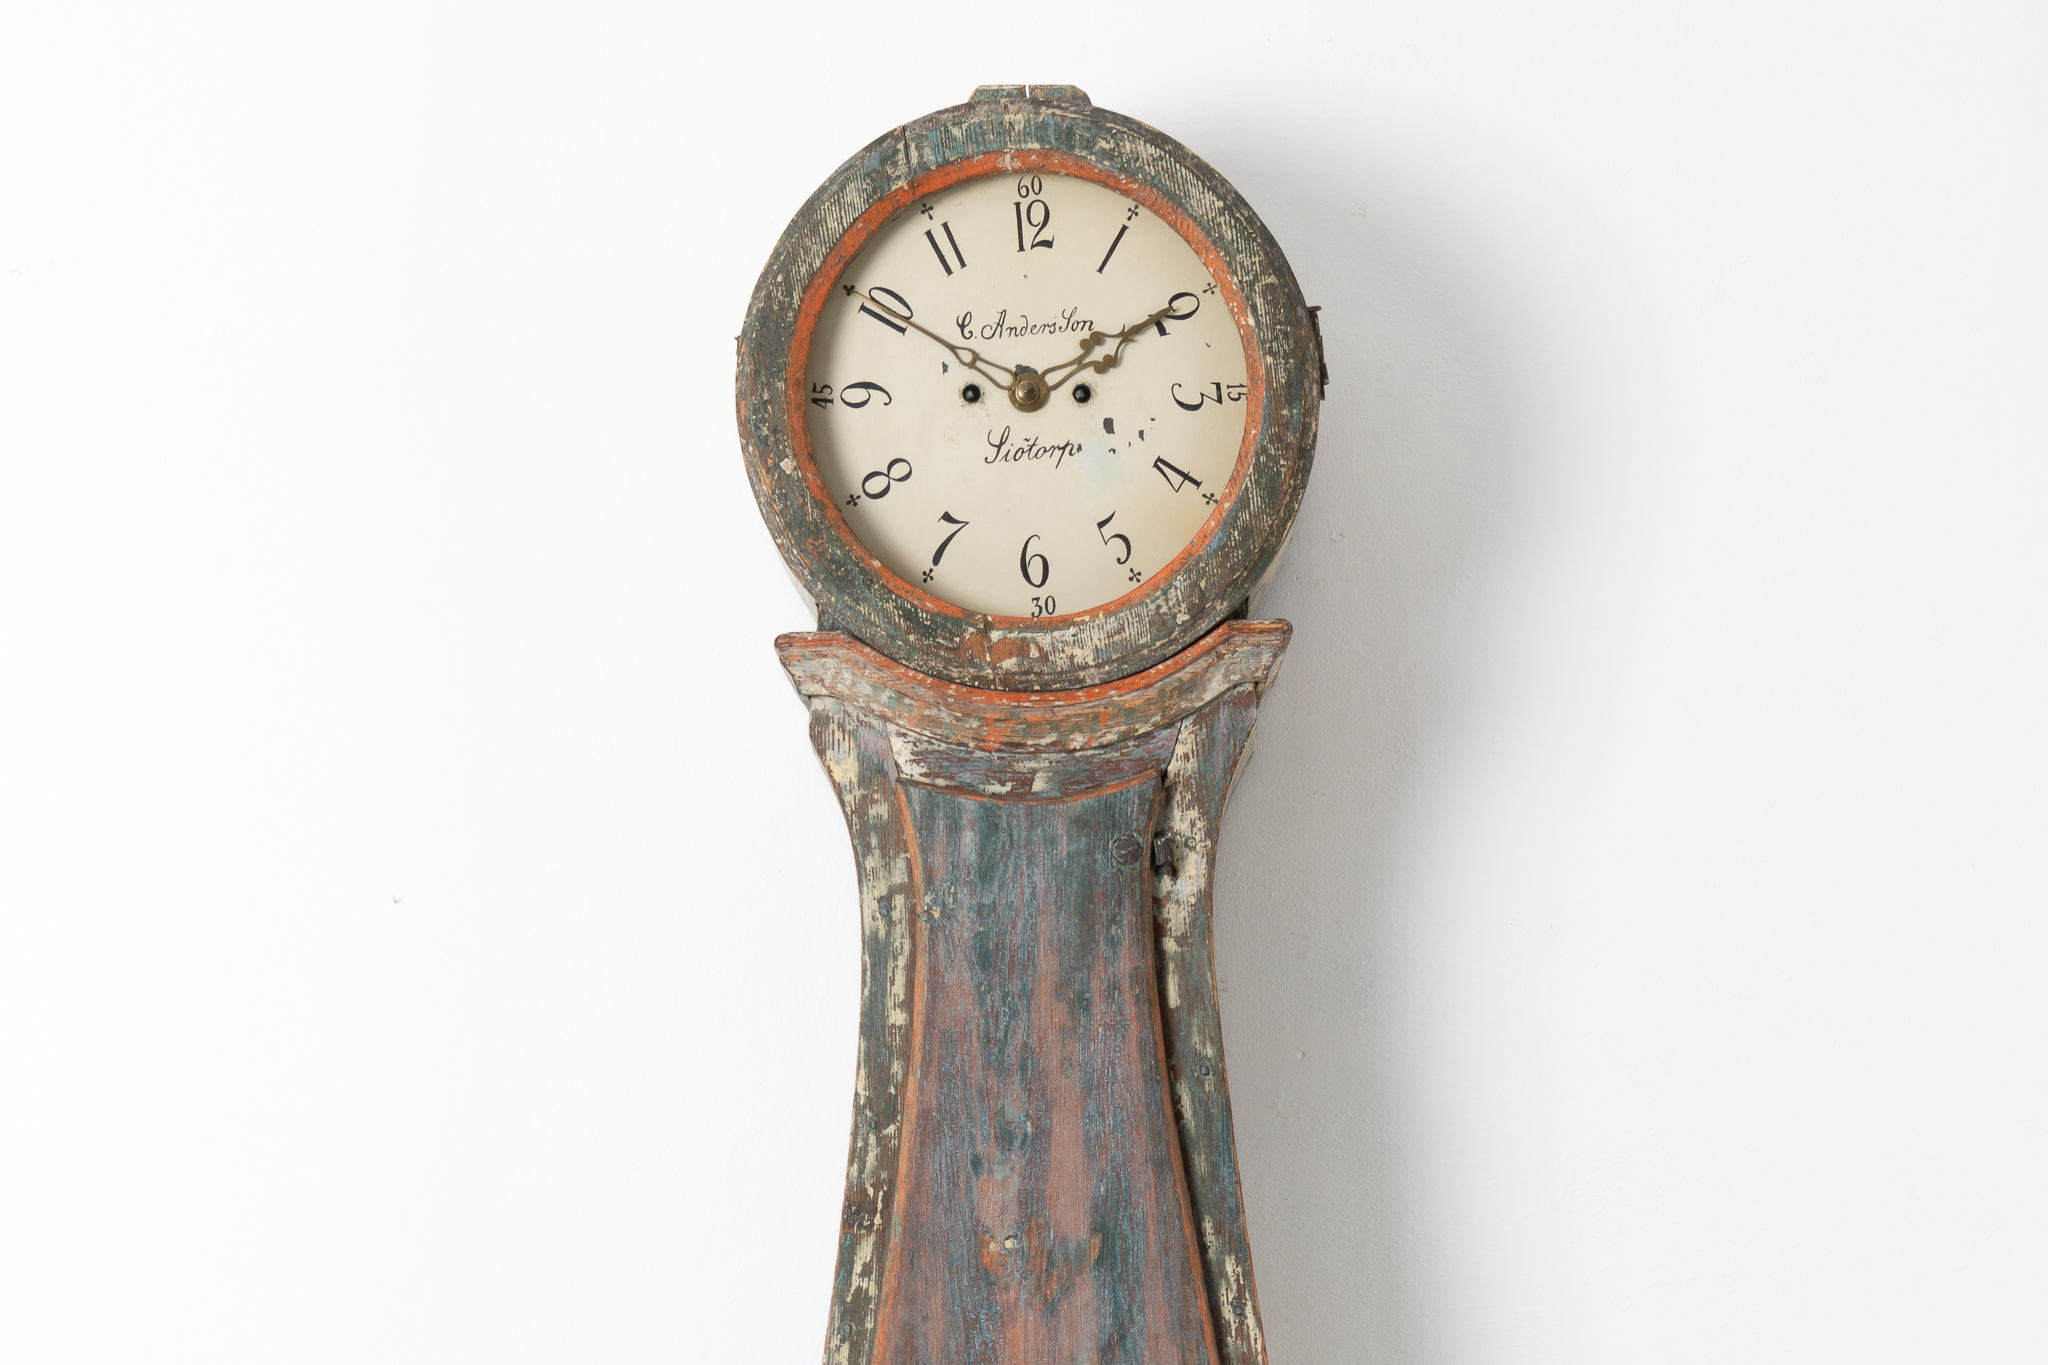 Swedish long case clock from the 1820s to 1840s. The clock has a rococo shape with the original blue green paint and case in pine